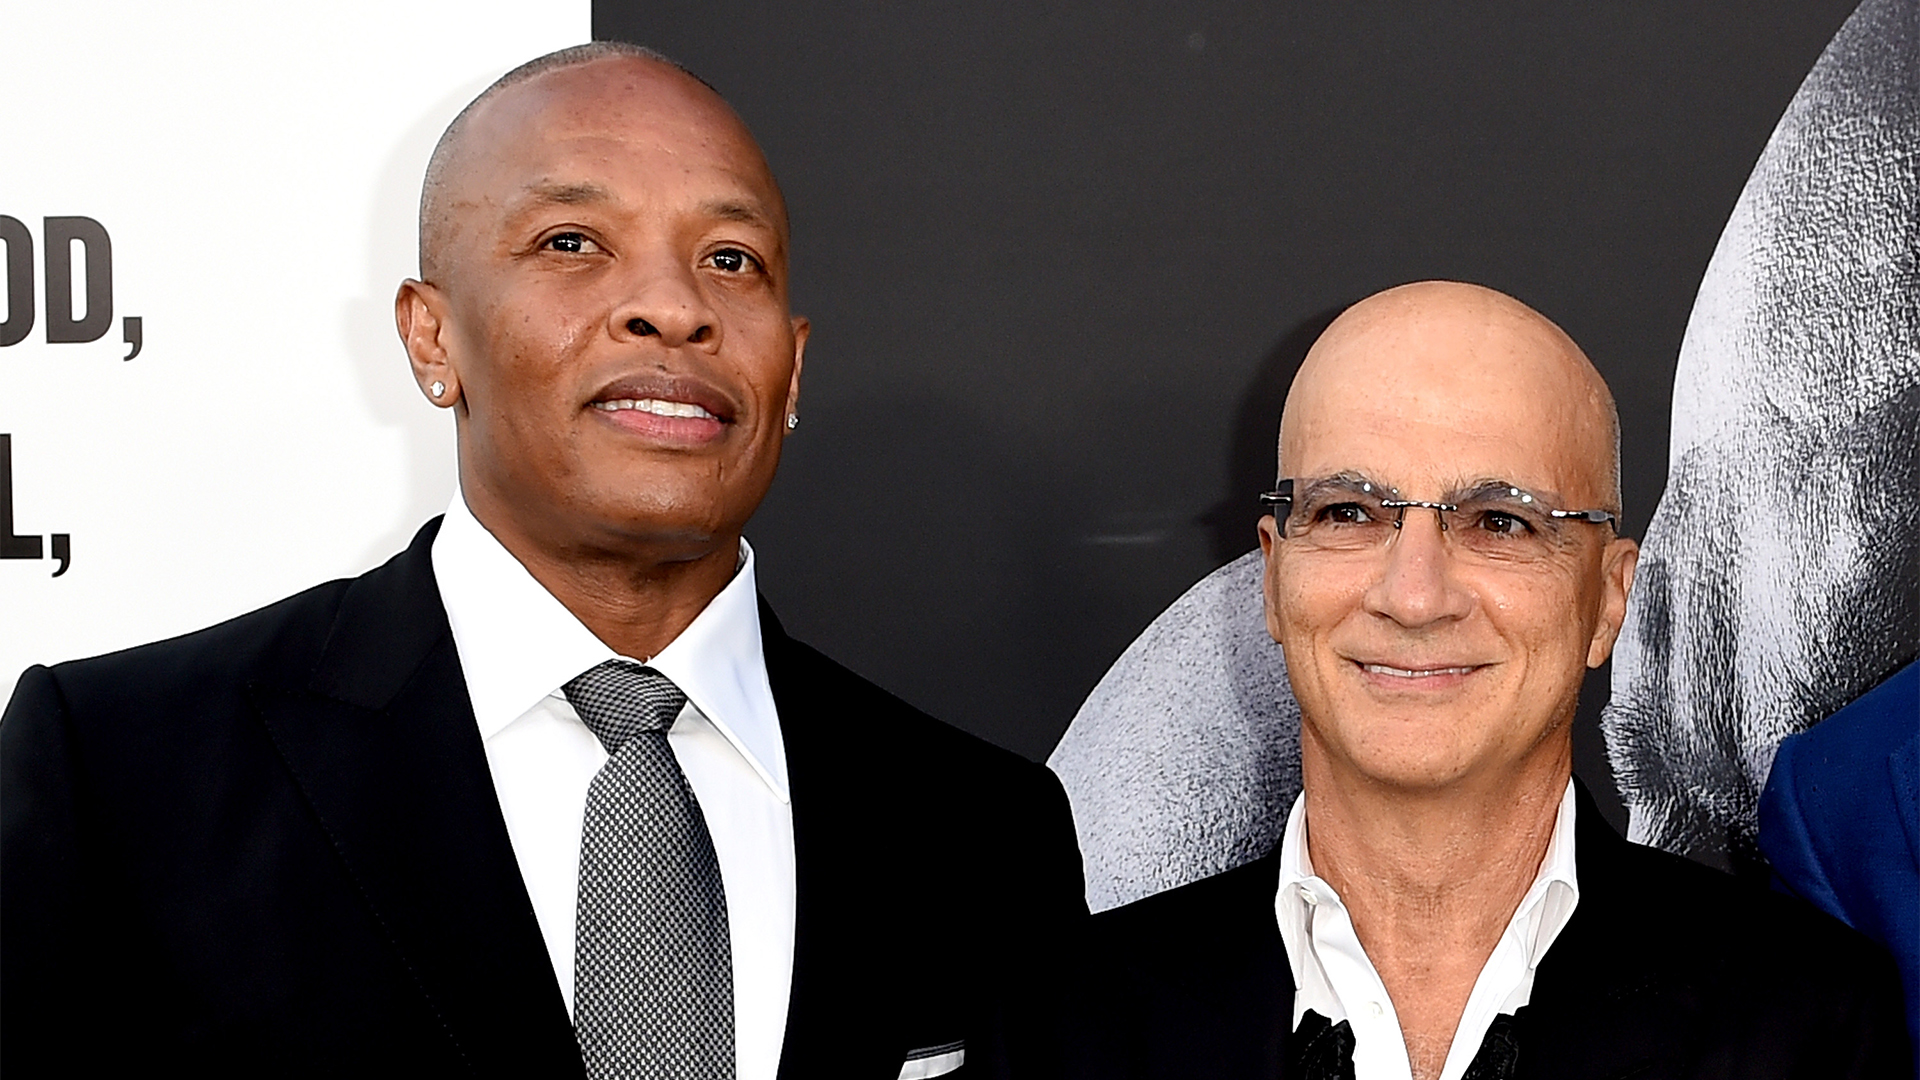 Jimmy Iovine Says He Owes A Lot To Black Culture As He And Dr. Dre Take On The U.S. Public School System